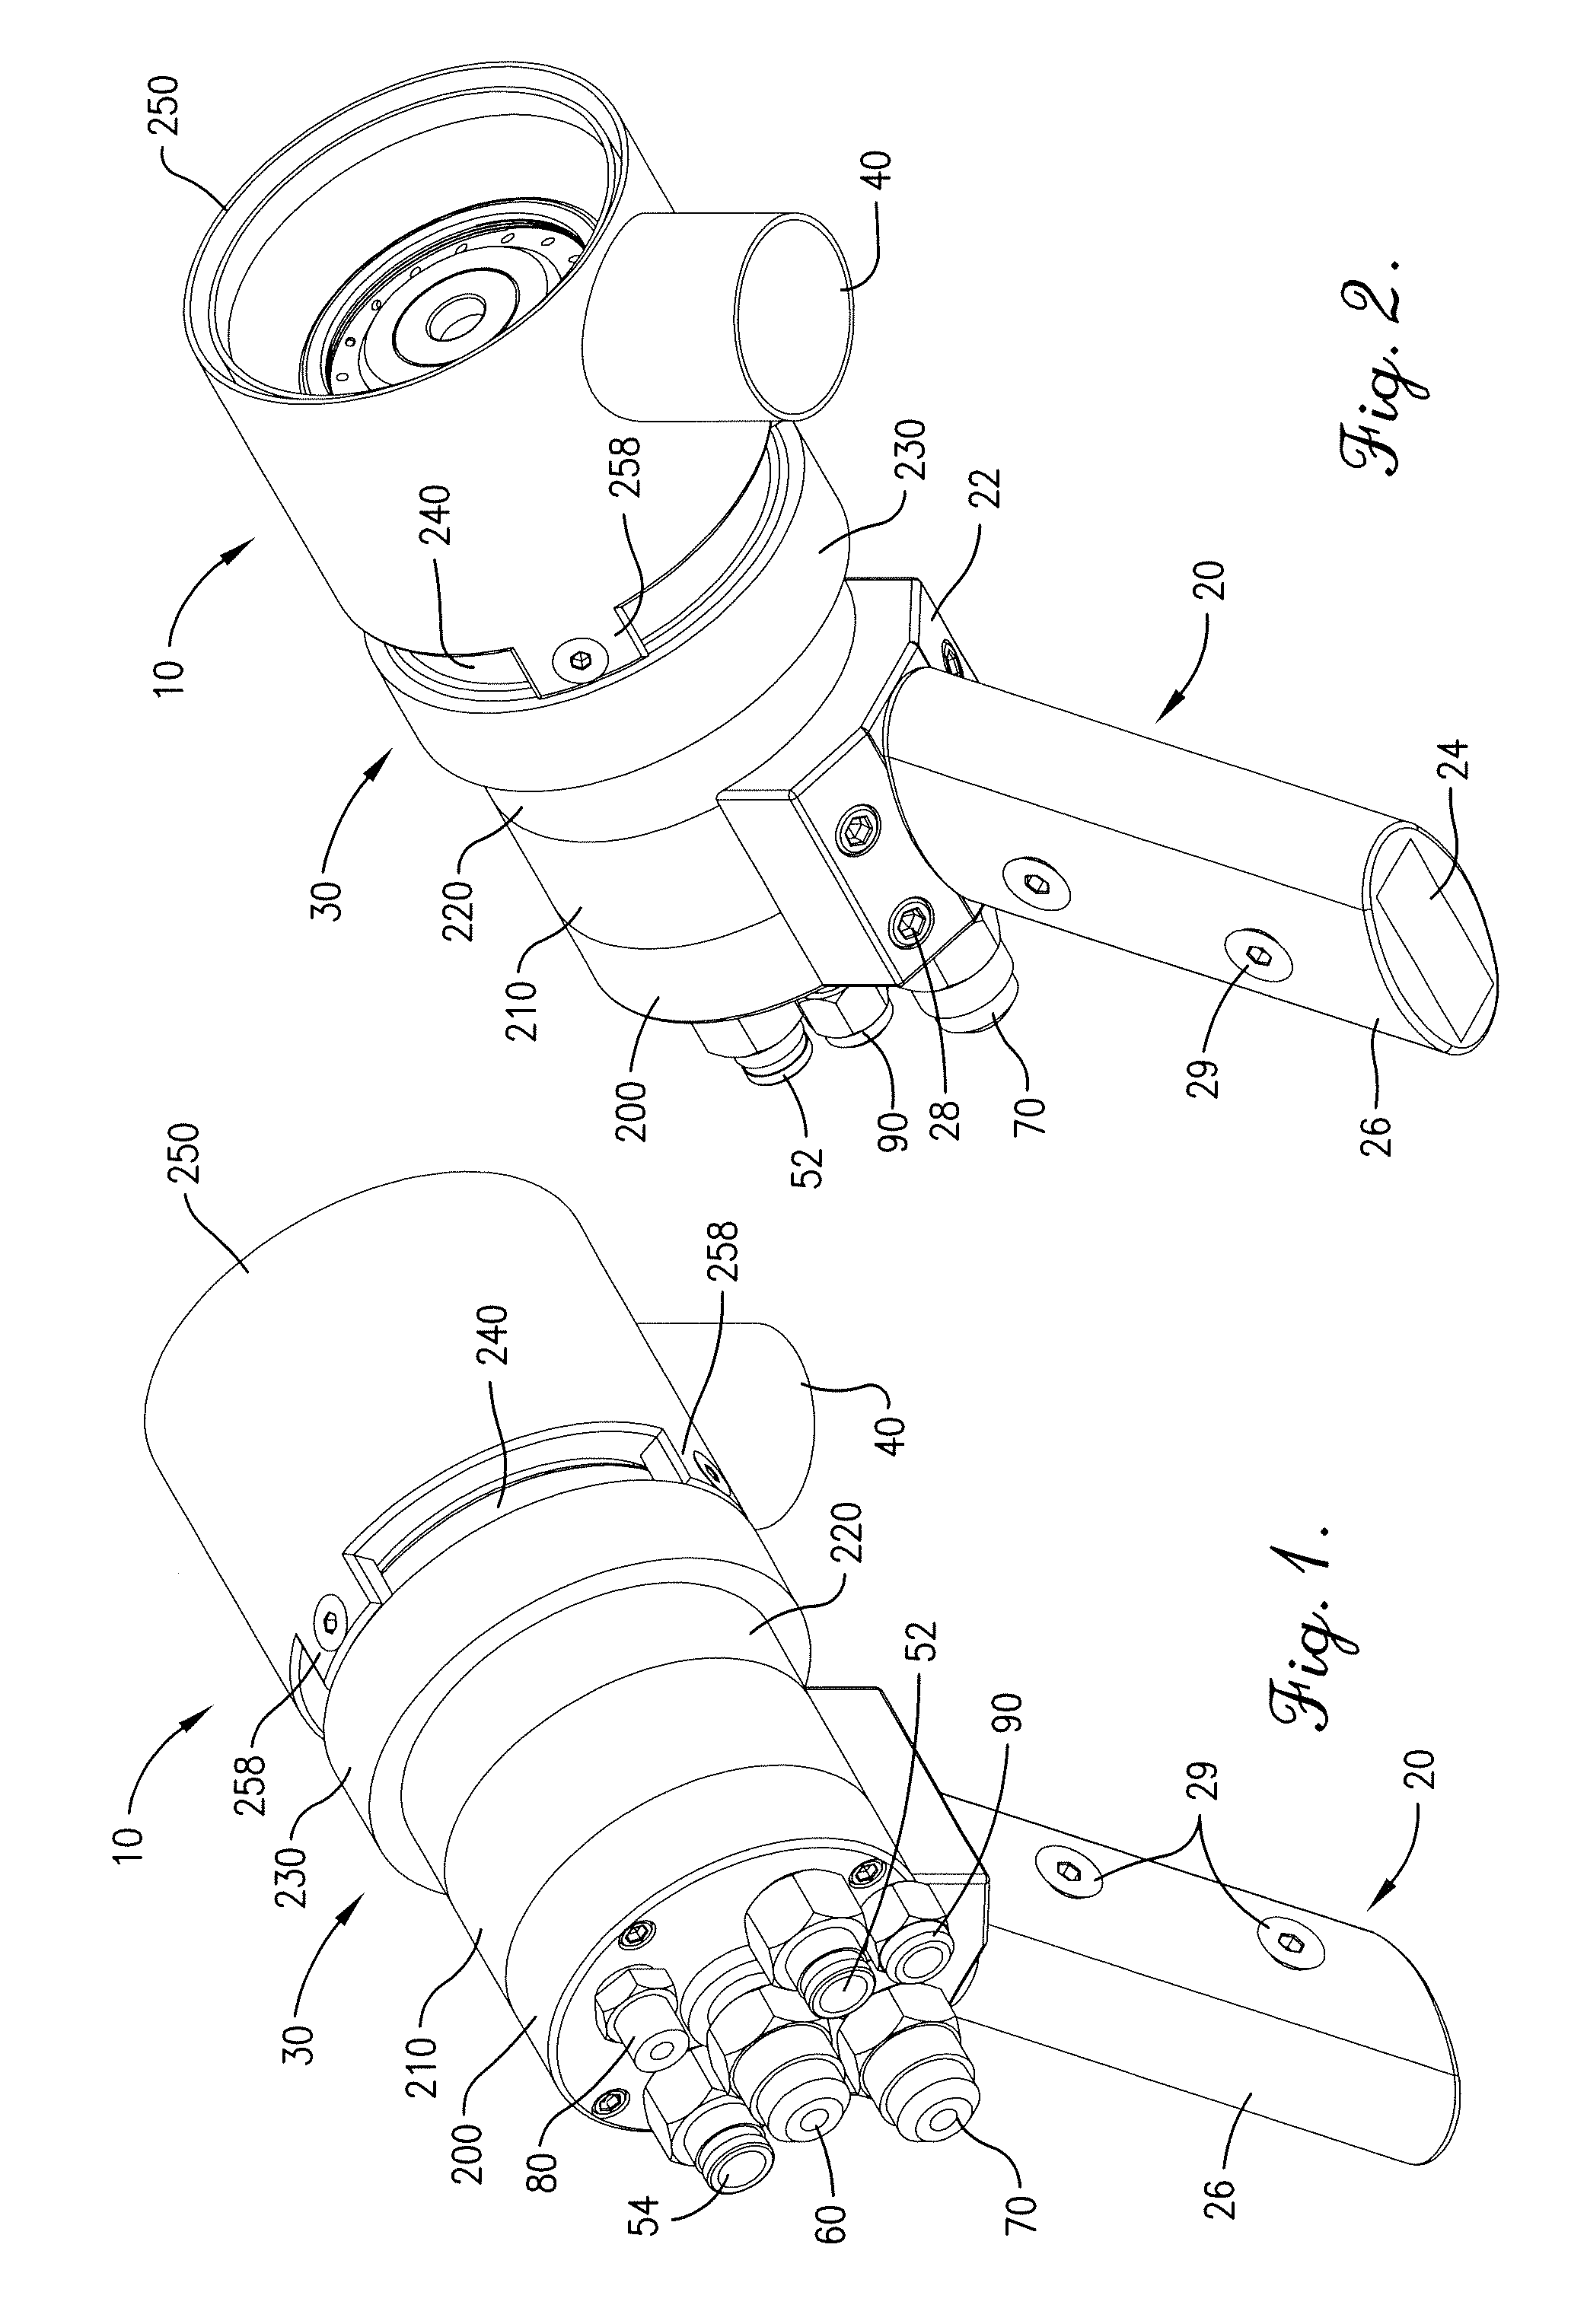 Apparatus and method for applying antifoulants to marine vessels